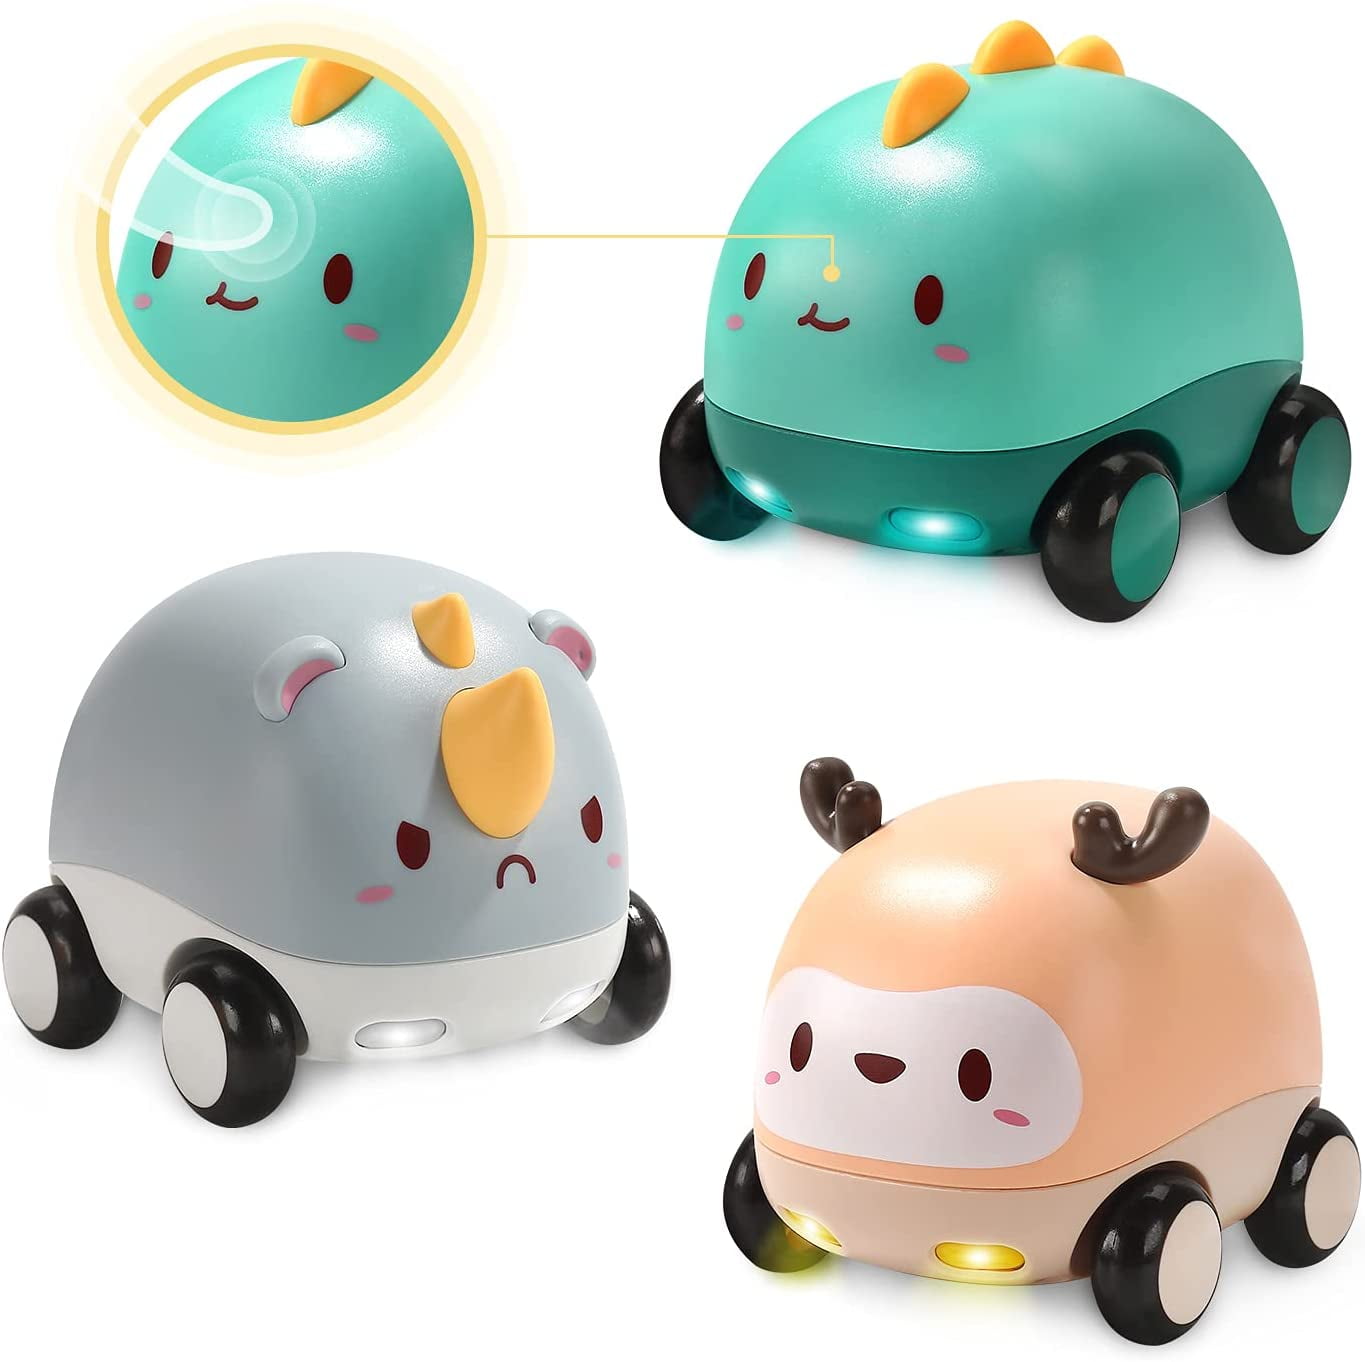 Cartoon Animals Friction Push and Go Toy Cars Play Set for Baby Set of 8